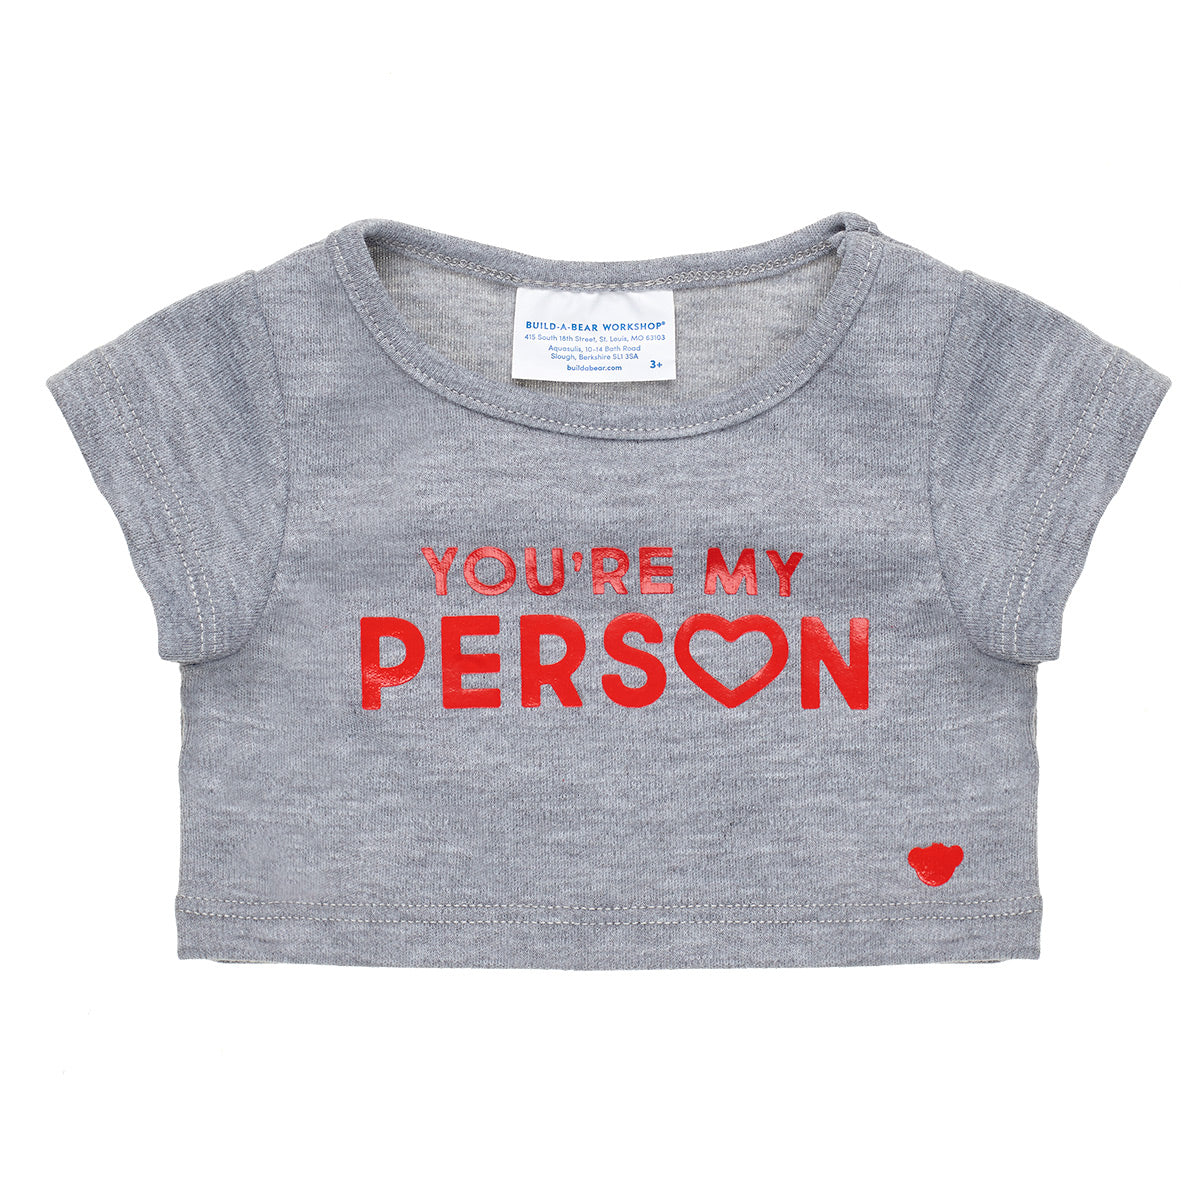 You're My Person Tee Build-A-Bear Workshop Australia